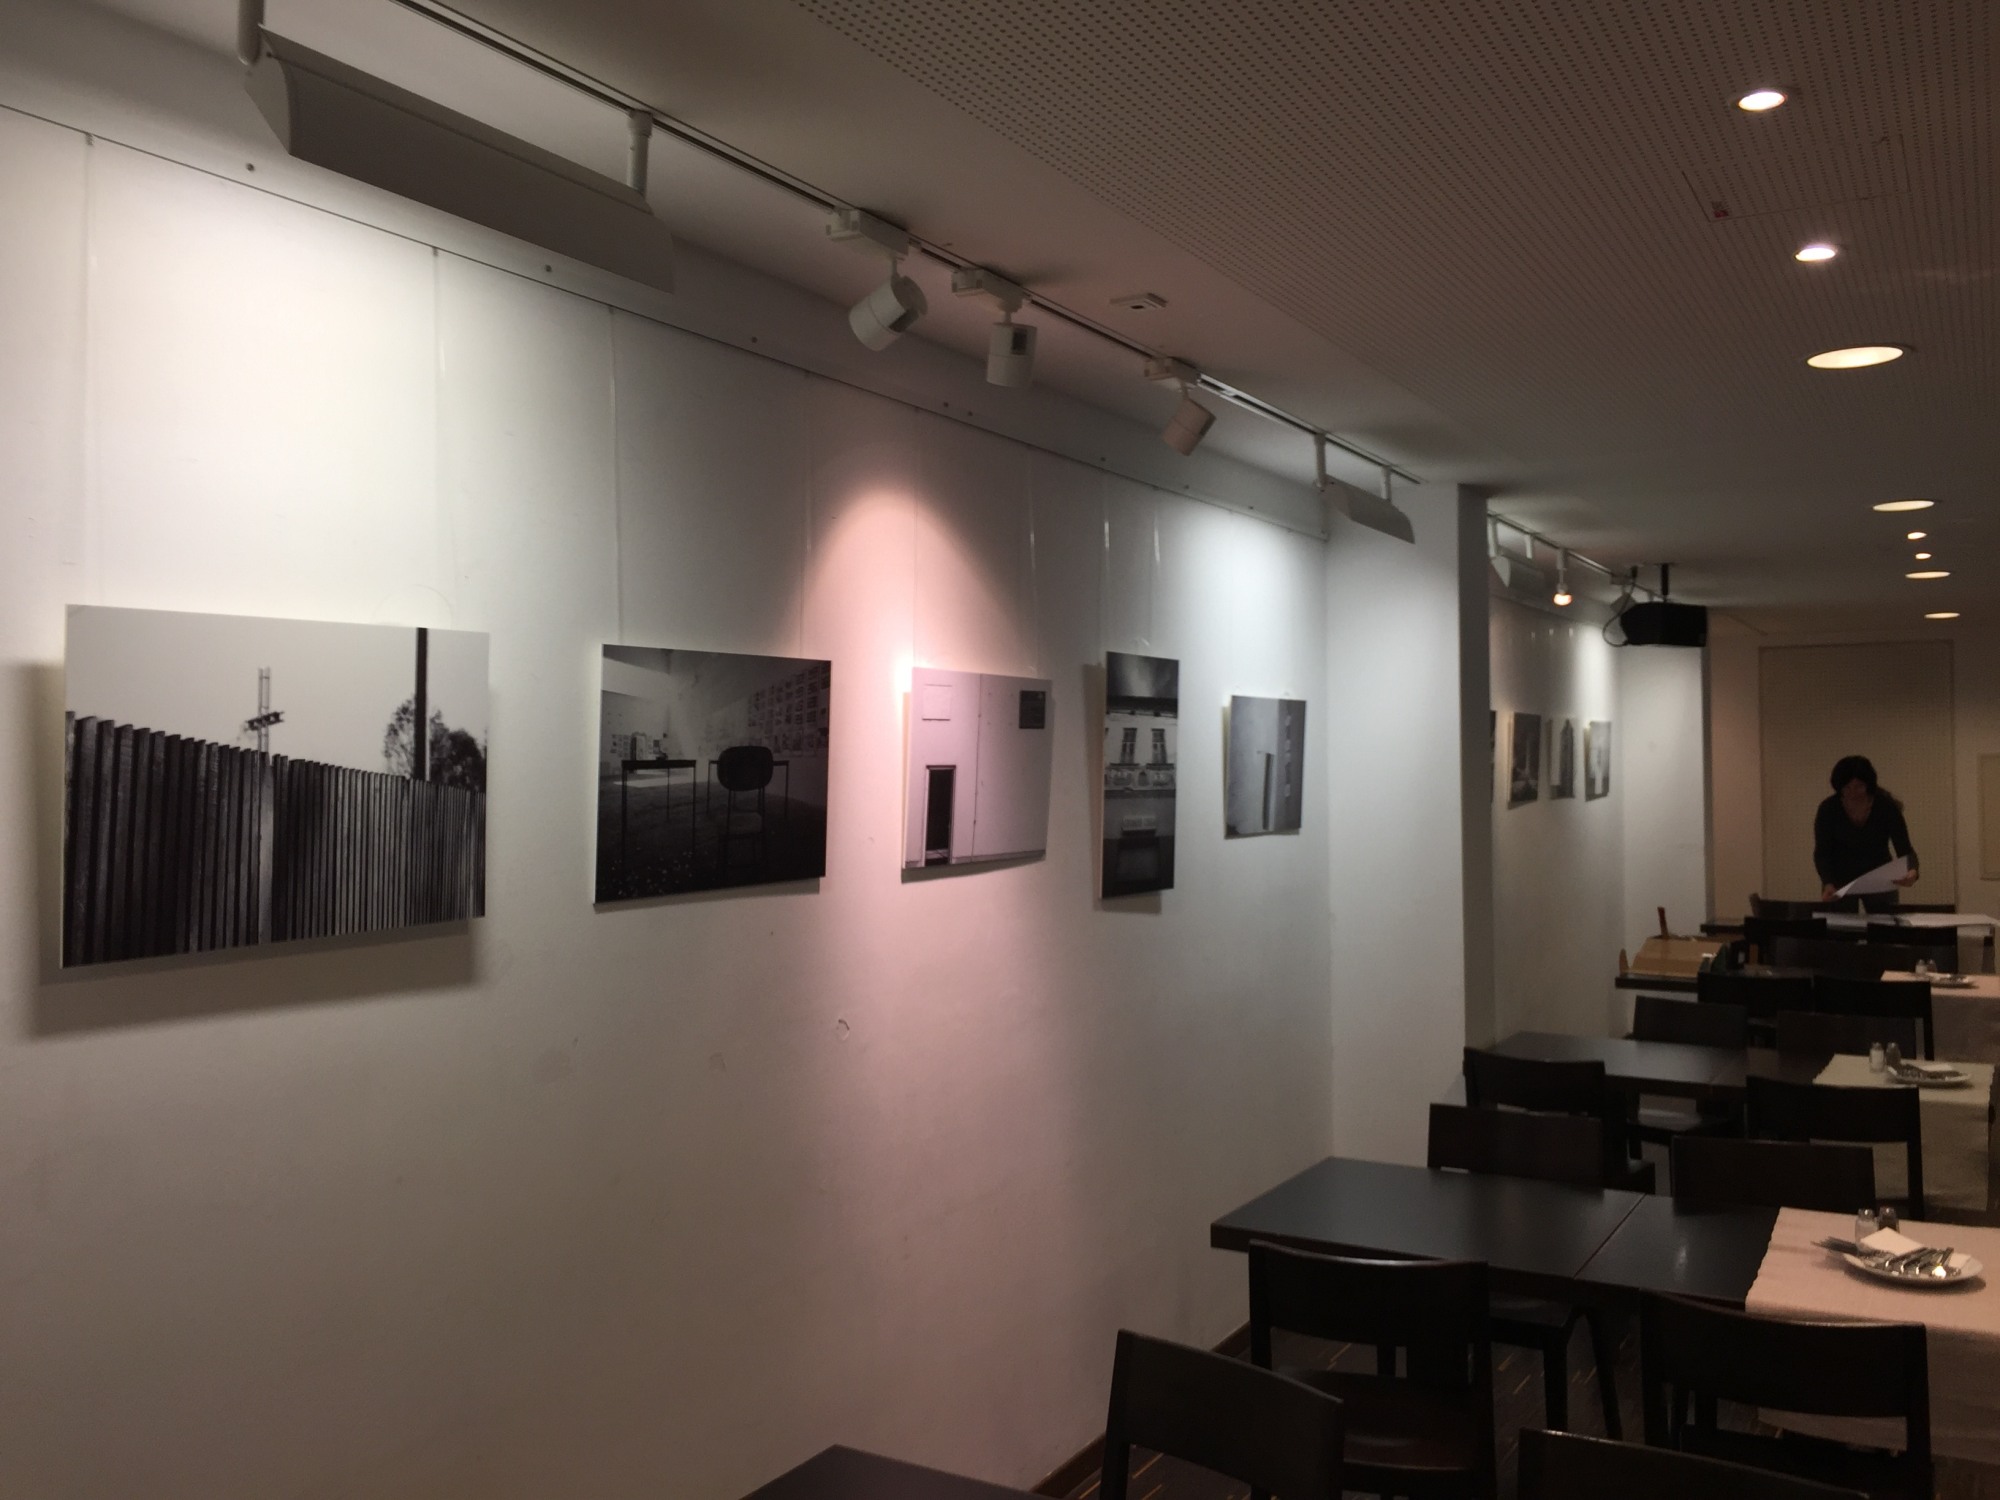 Photography Exhibition and Promotion of the Publication “War of Memories”, Vienna 8 – 9 April 2016